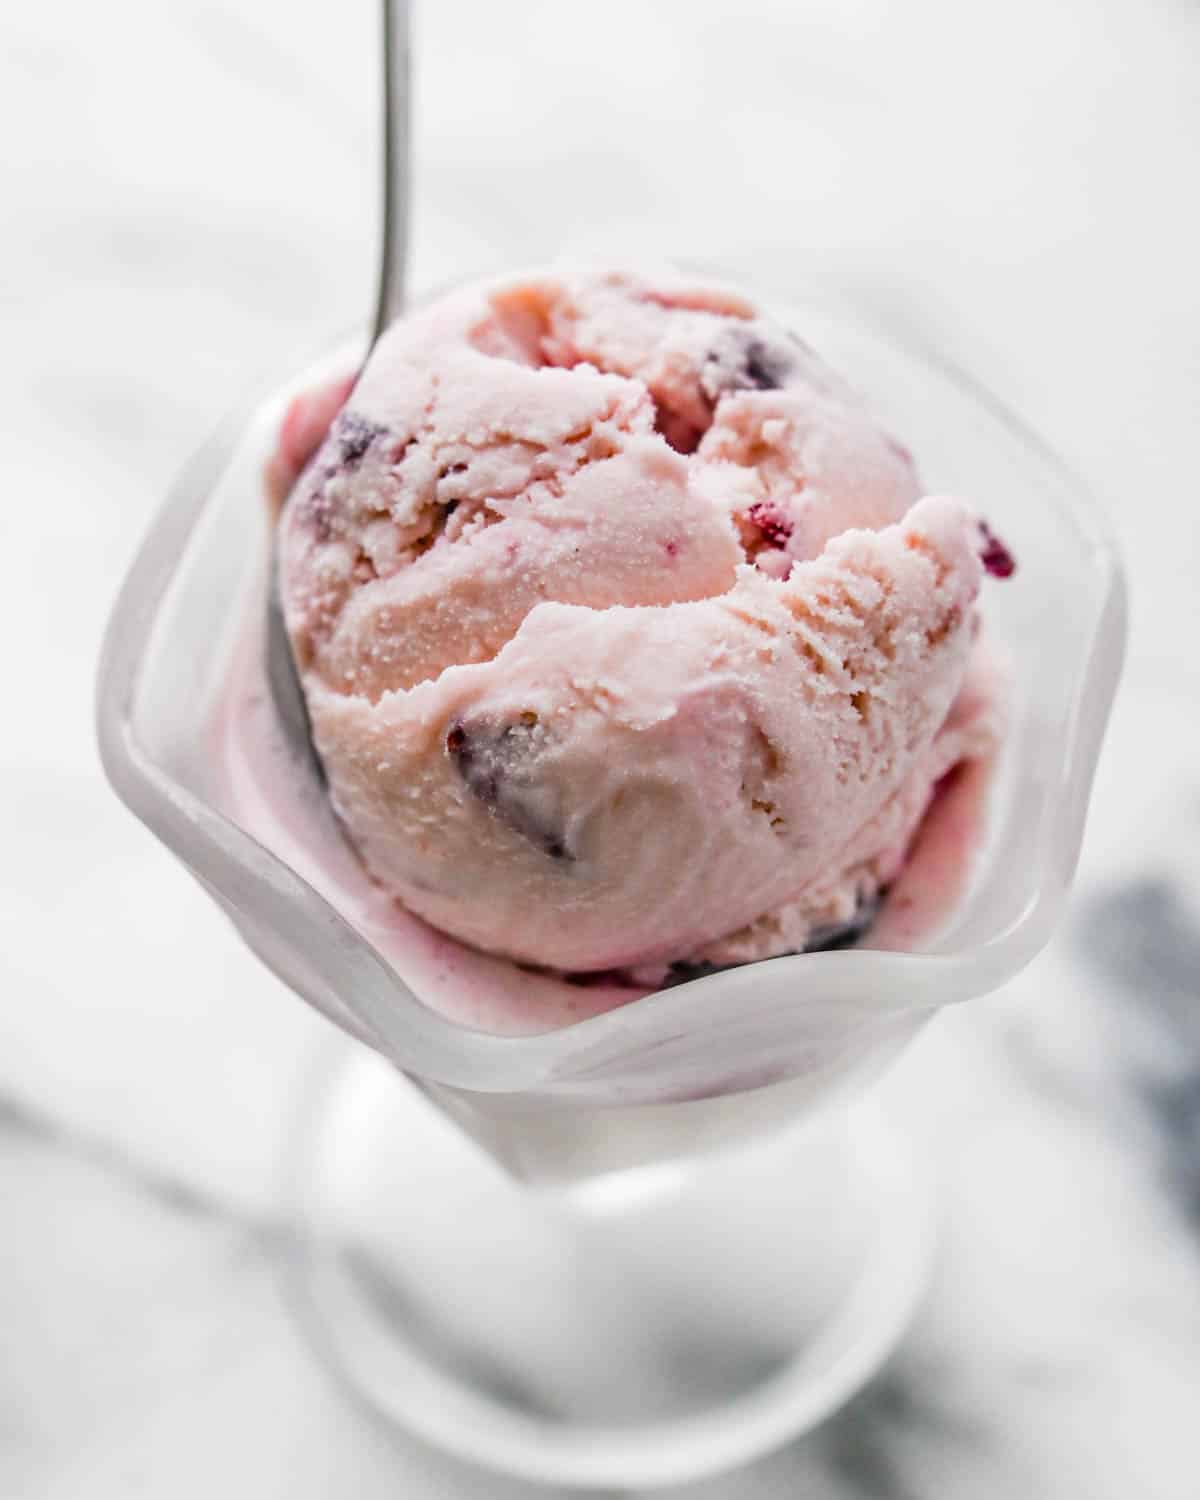 A dish of cherry ice cream with a spoon.